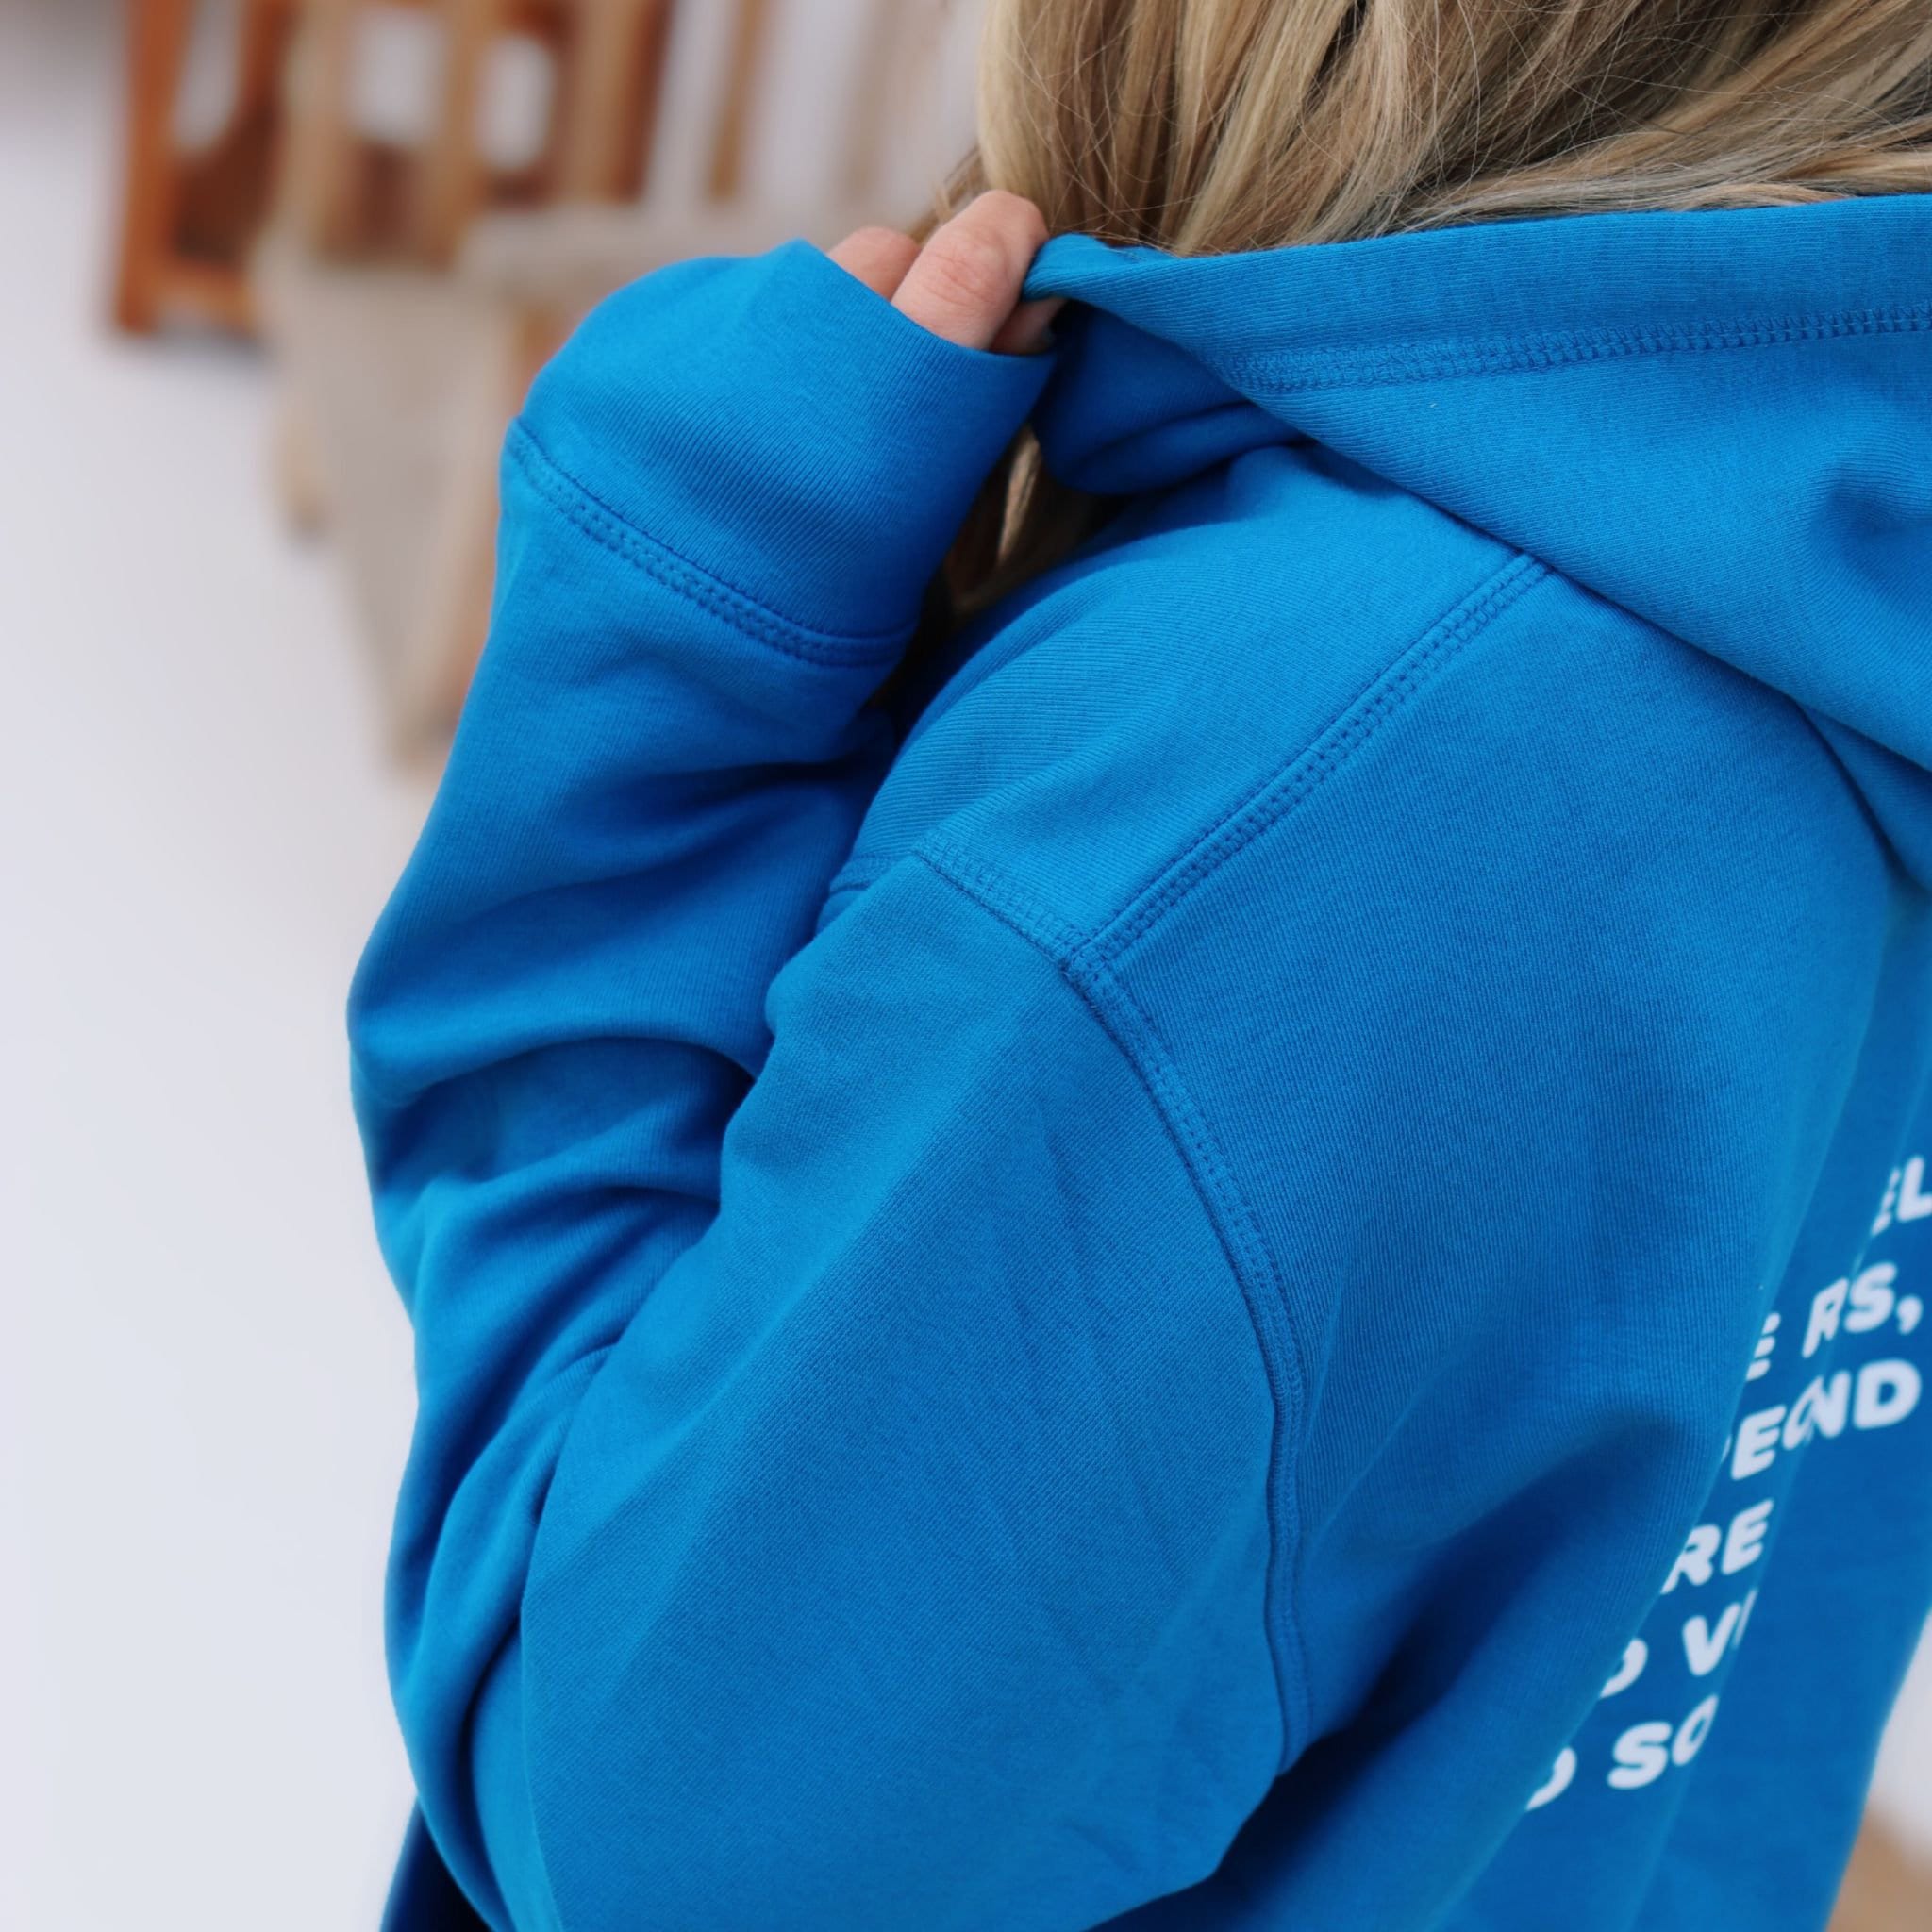 Pullover Hoodie Women Blue With Print Saying Kind Souls, Hooded